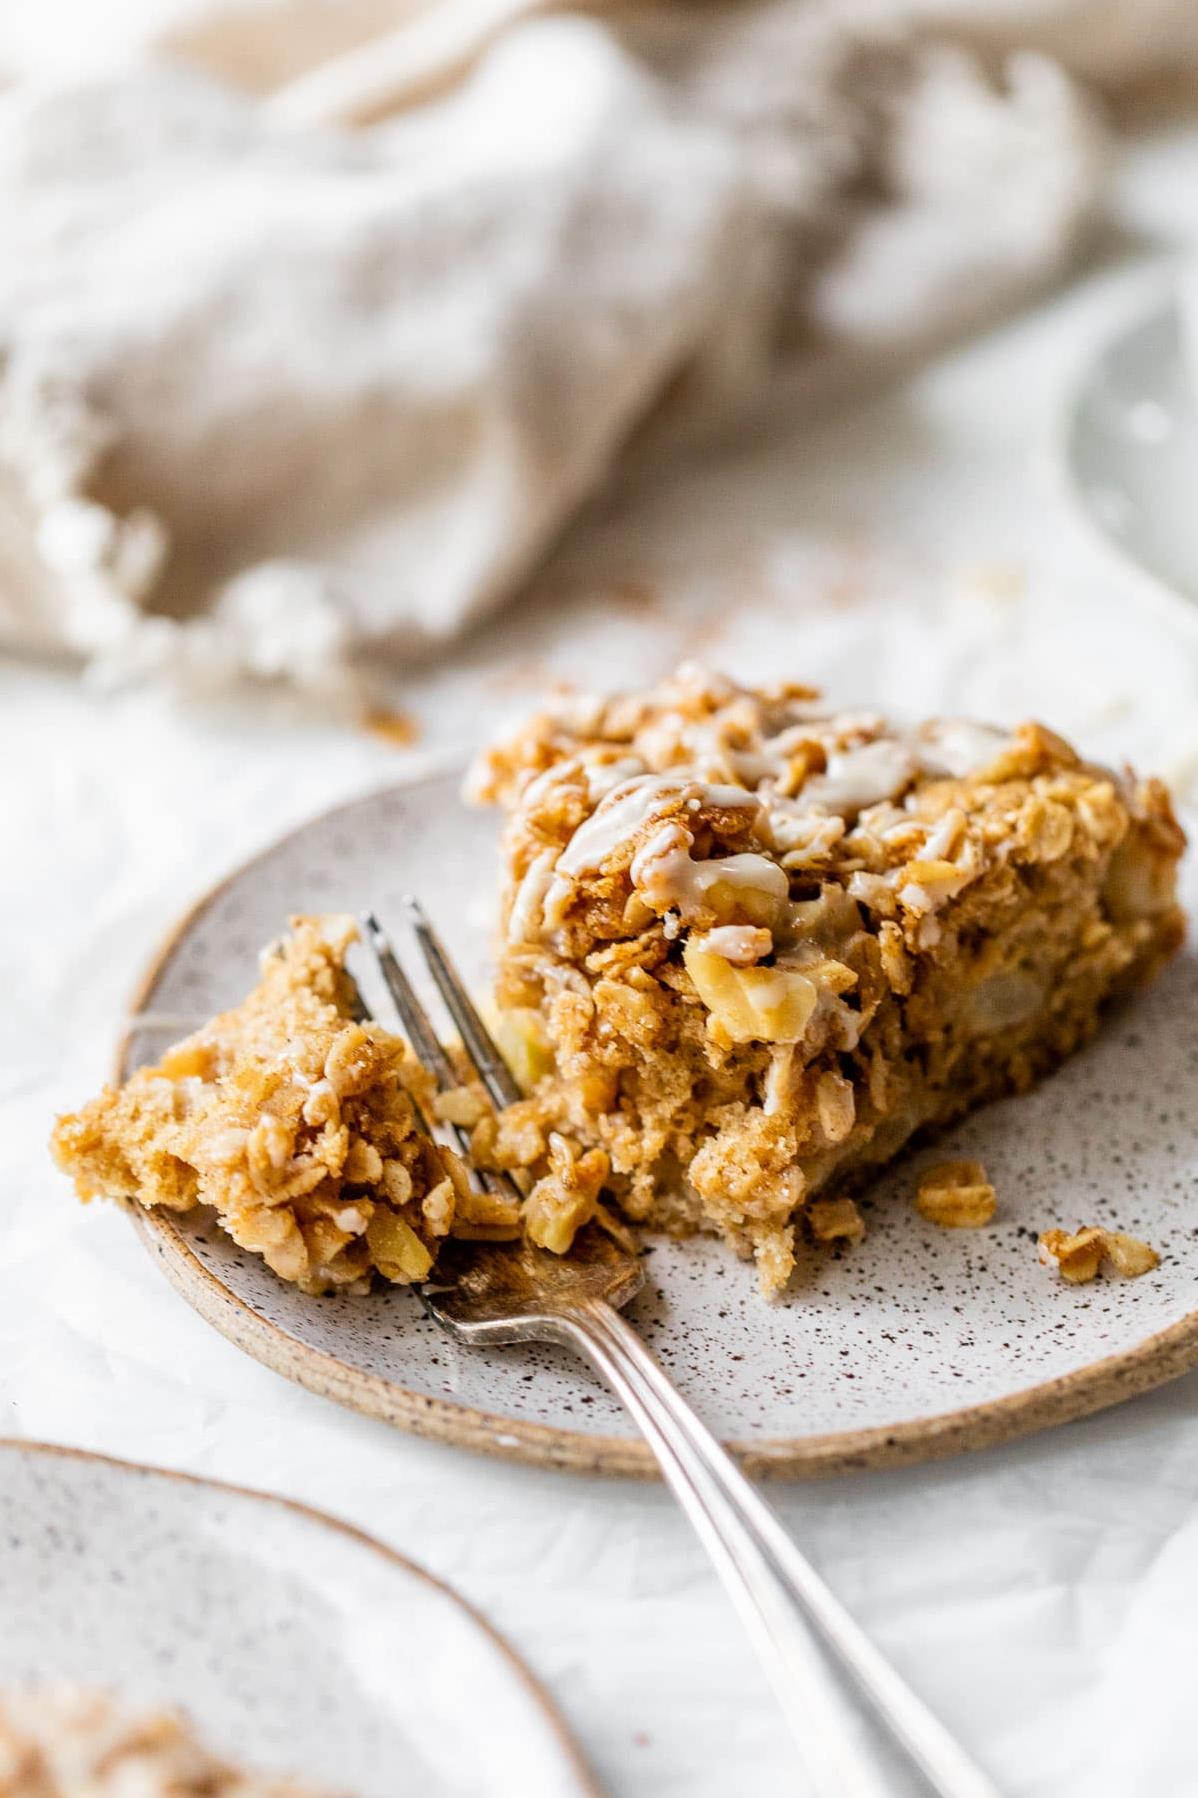  Savor each bite of this delicious and healthy apple coffee cake!